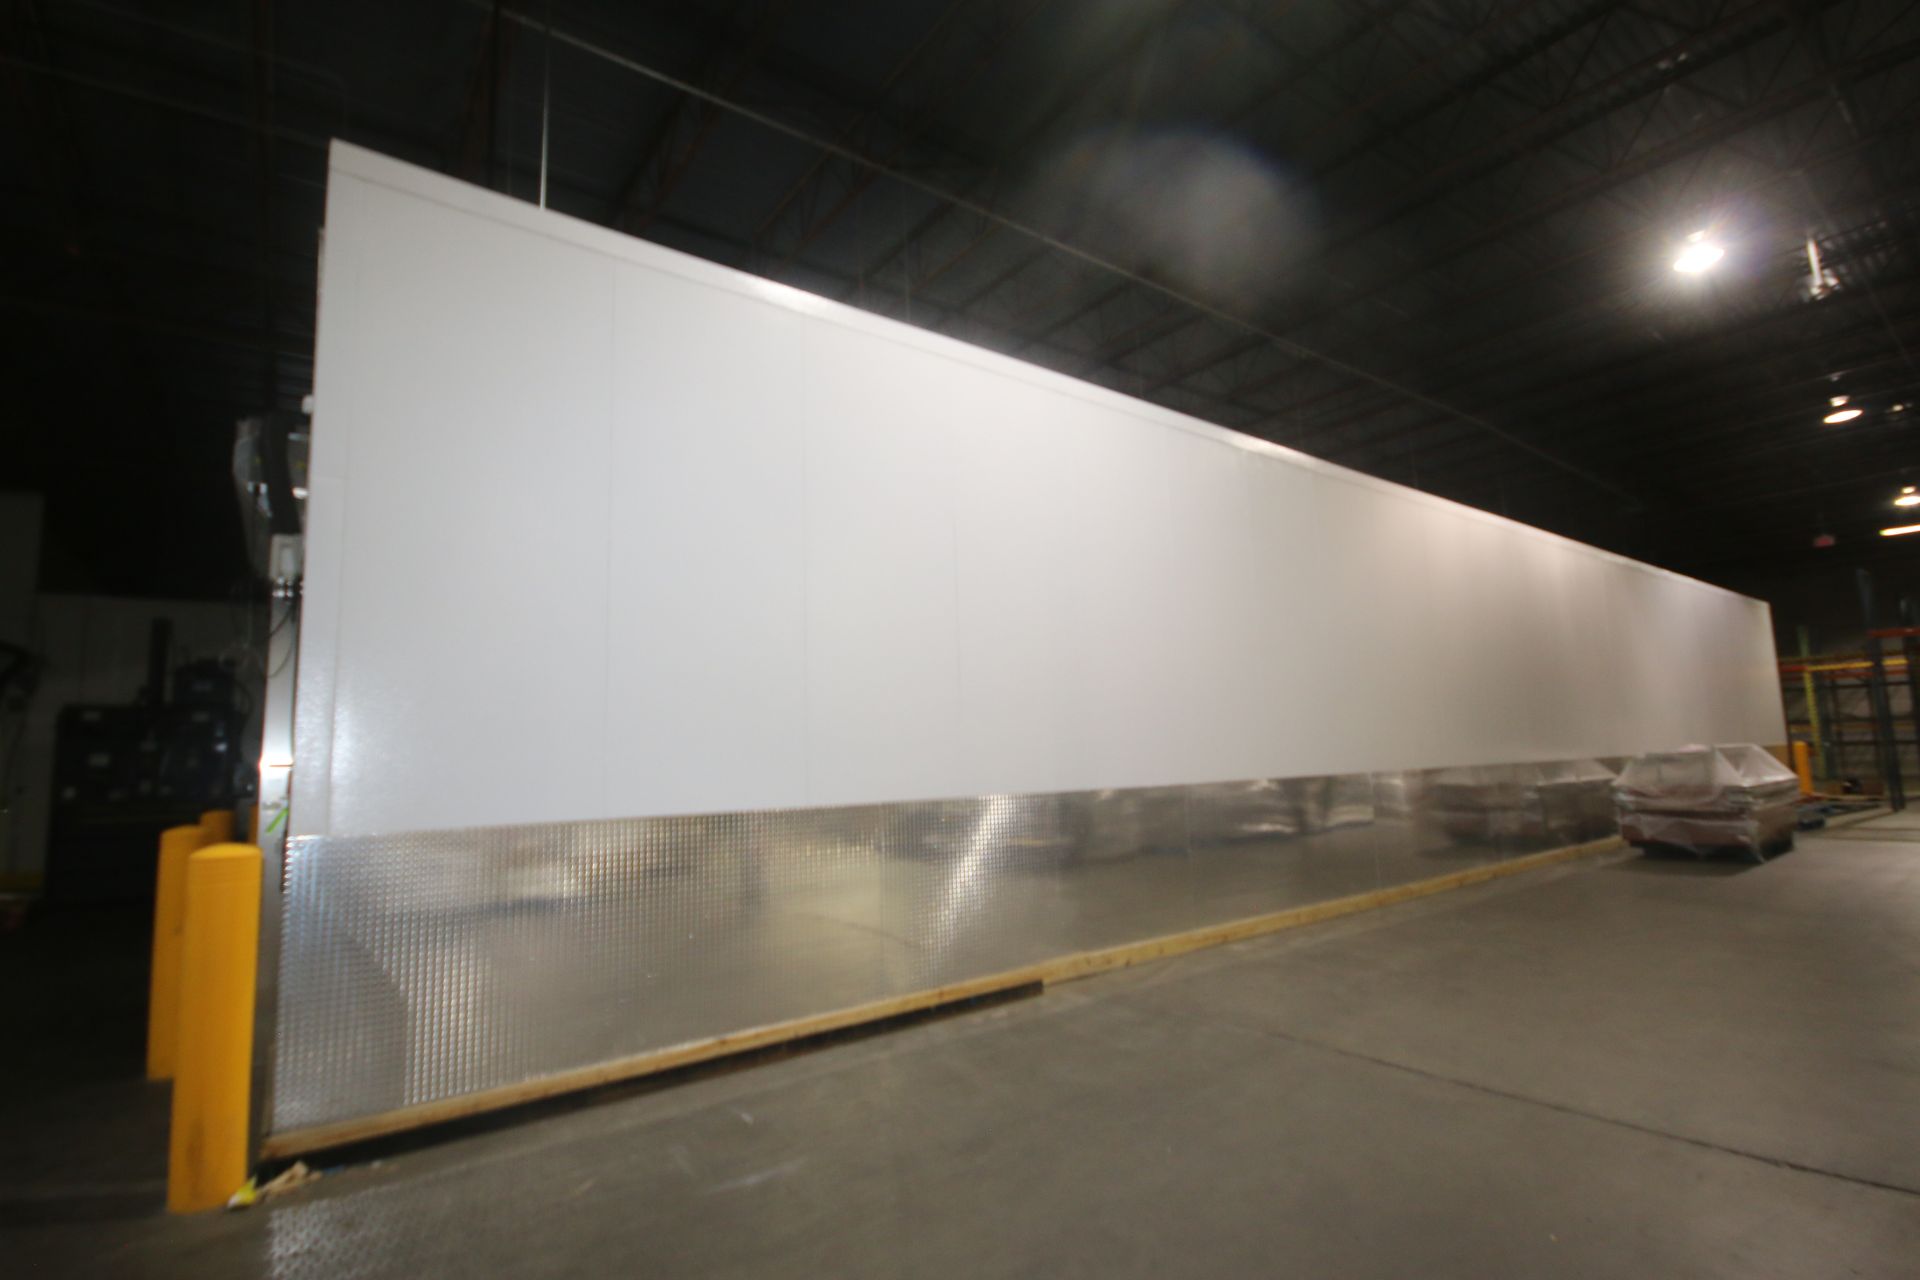 2018 RollSeal Air Tight Drive-Thru Modular Room, Overall Dims.: Aprox. 88' L x 20' W x 190" Tall, - Image 16 of 24